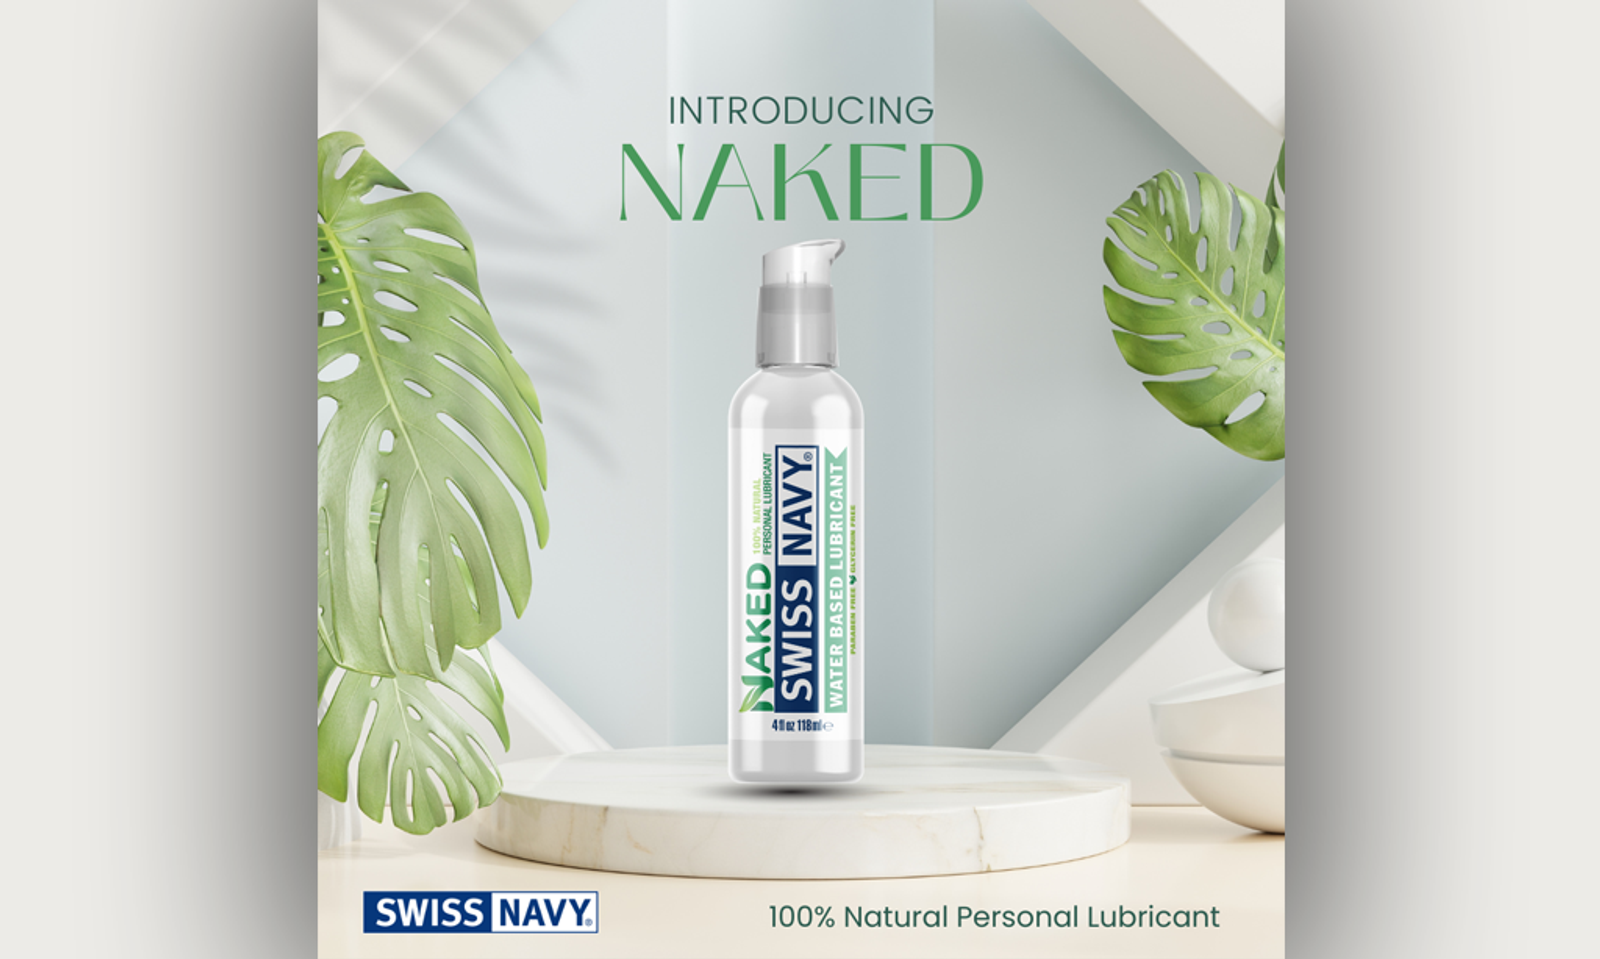 Swiss Navy’s Naked 100% Natural Personal Lubricant Now Shipping